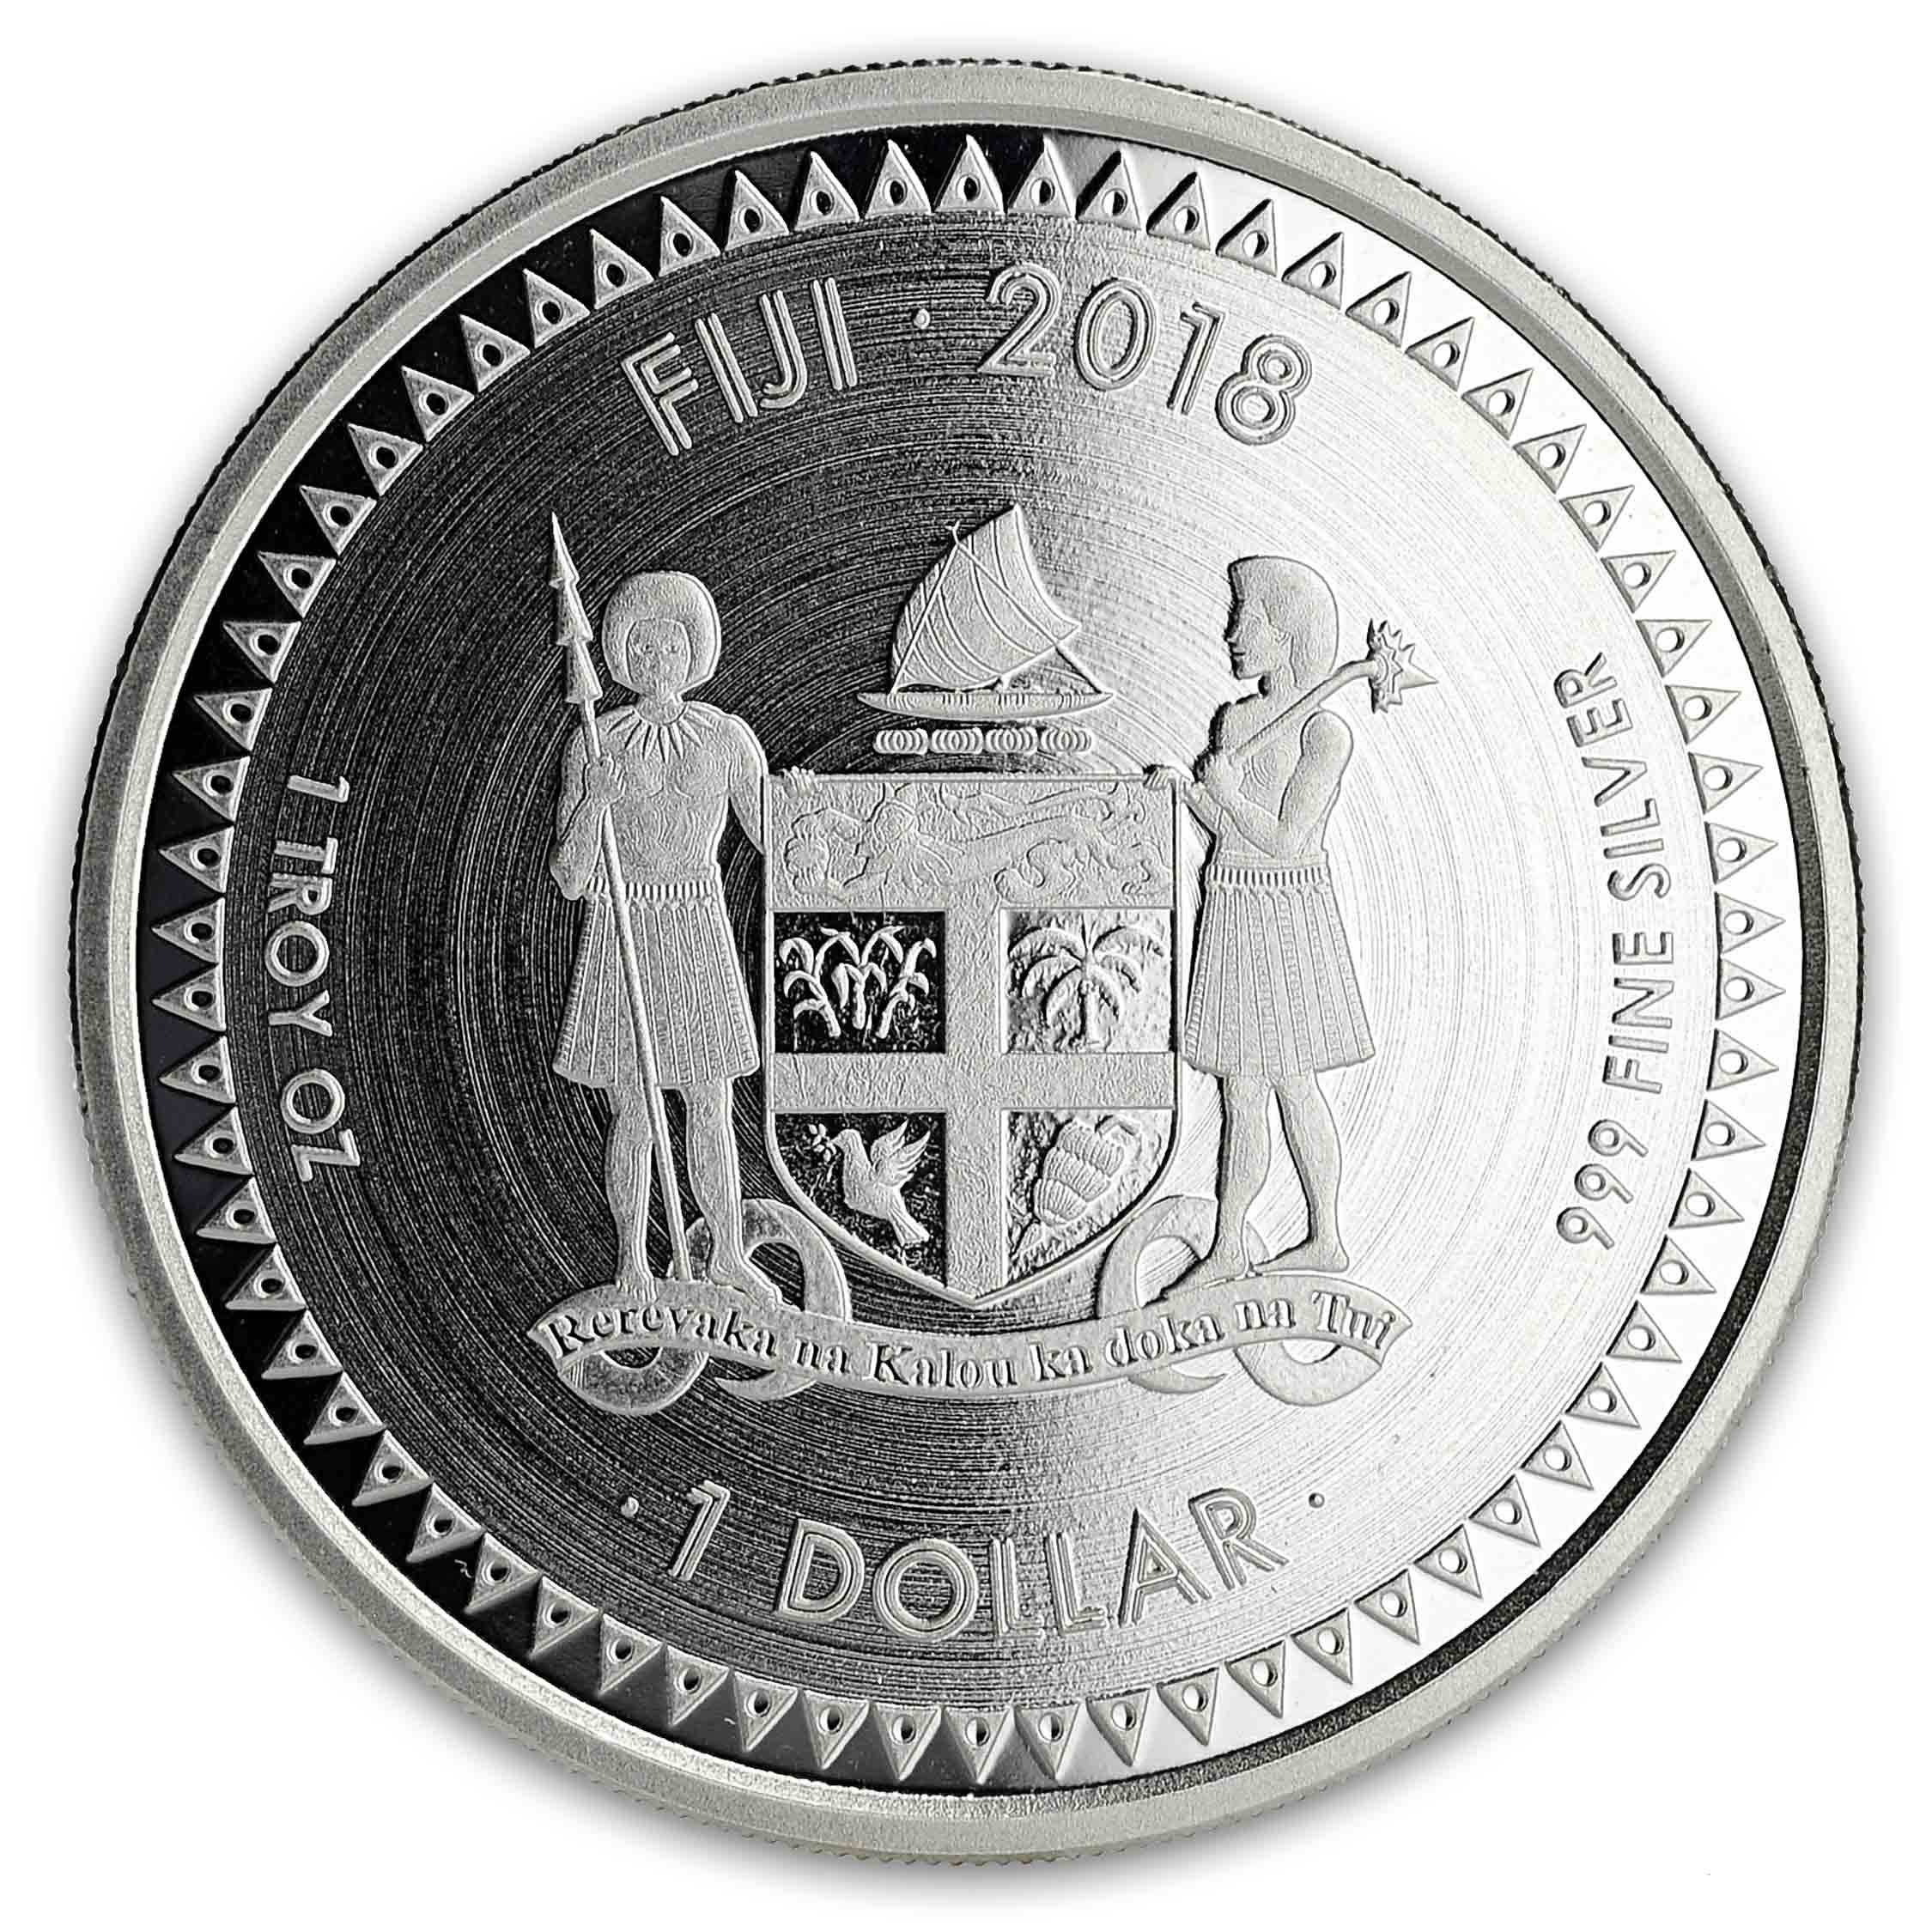 Details about   2018 Fiji PACIFIC DOLLAR $1 silver BU coin .999 fine silver